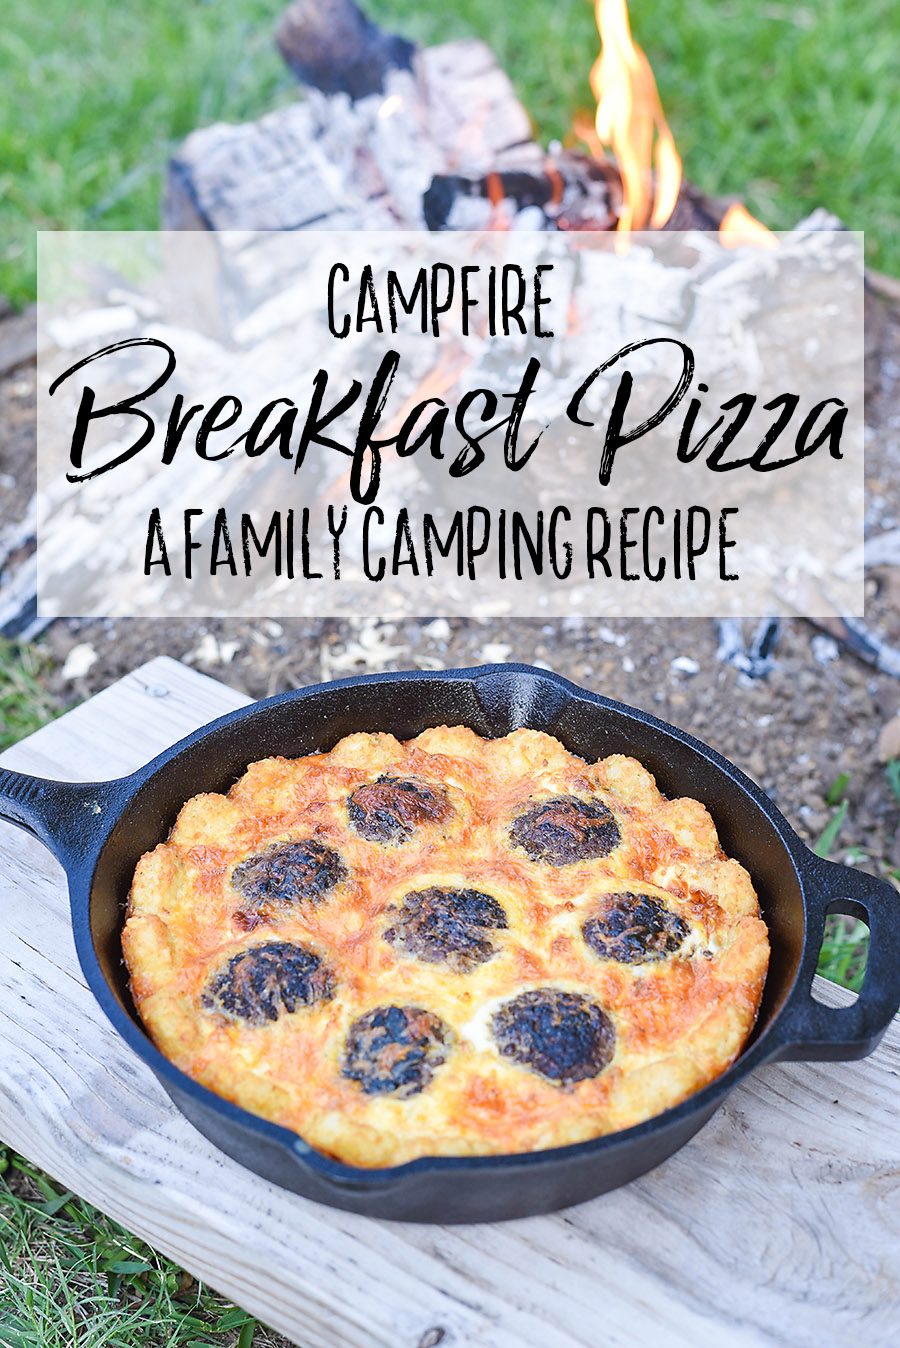 http://ourhandcraftedlife.com/wp-content/uploads/2018/06/Campfire-Breakfast-Pizza-Our-Handcrafted-Life-Tall.jpg